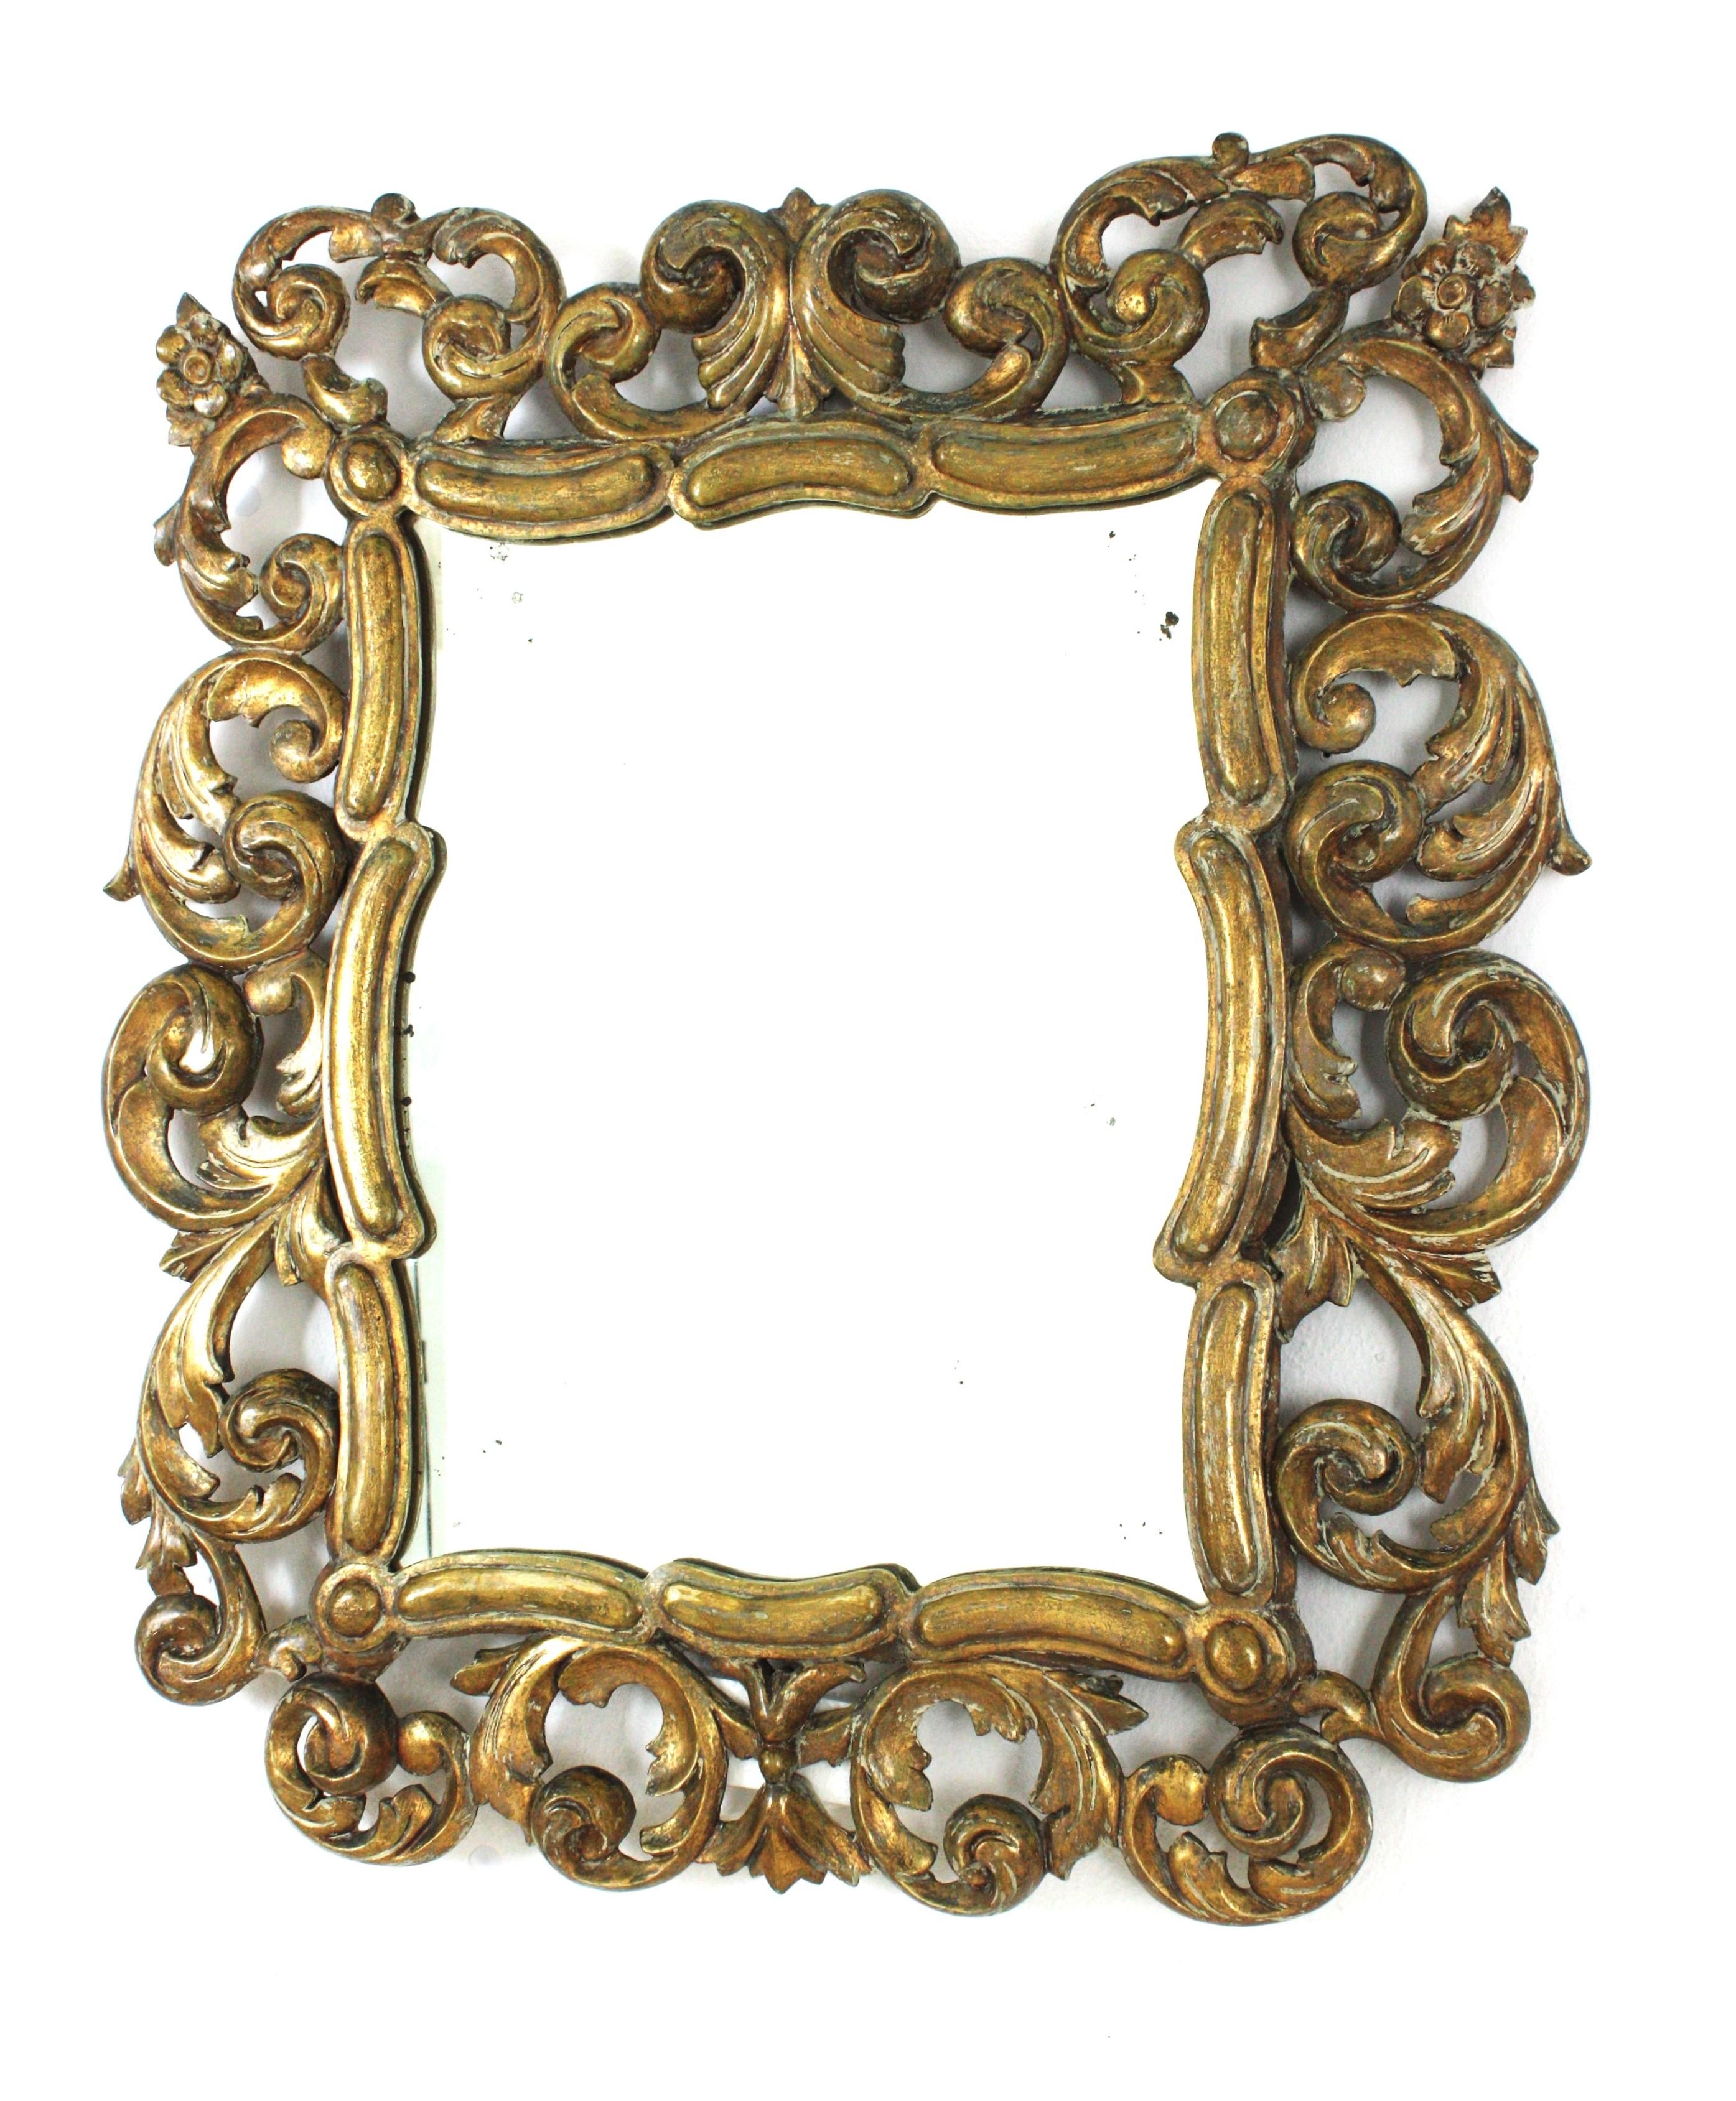 Spanish Foliage Gilt Carved Wood Mirror with Scroll Work Design For Sale 3